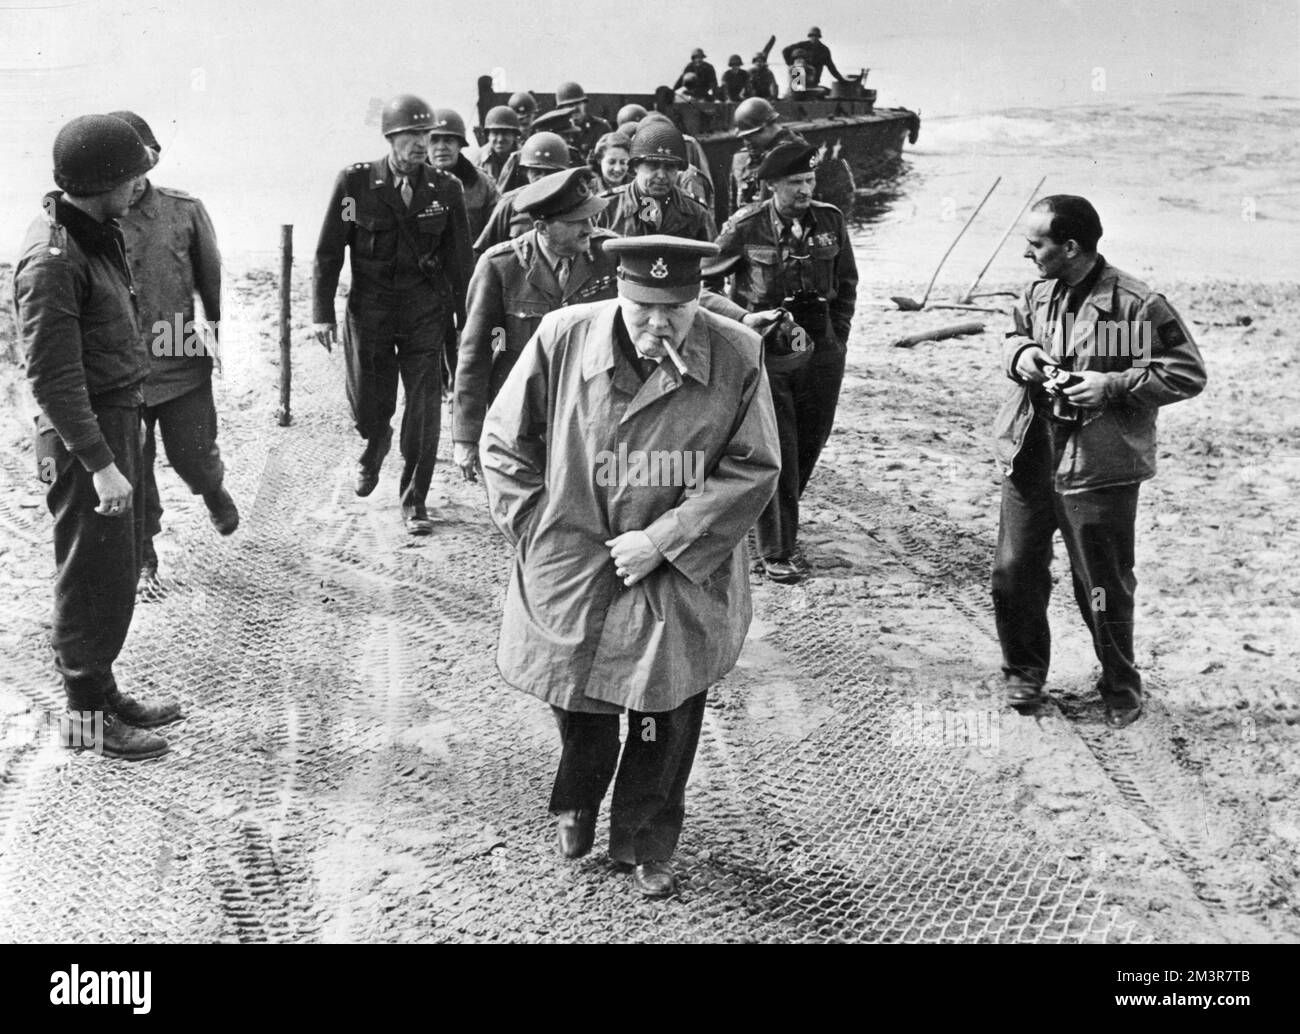 British Prime Minister, Winston Churchill, on the German-held east bank of the Rhine, with Field Marshall Montgomery (in beret) and Field Marshall Brooke (immediately behind Churchill) in March 1945 as part of Operation Plunder in World War Two. They are with US commanders and guards.     Date: 25th March 1945 Stock Photo